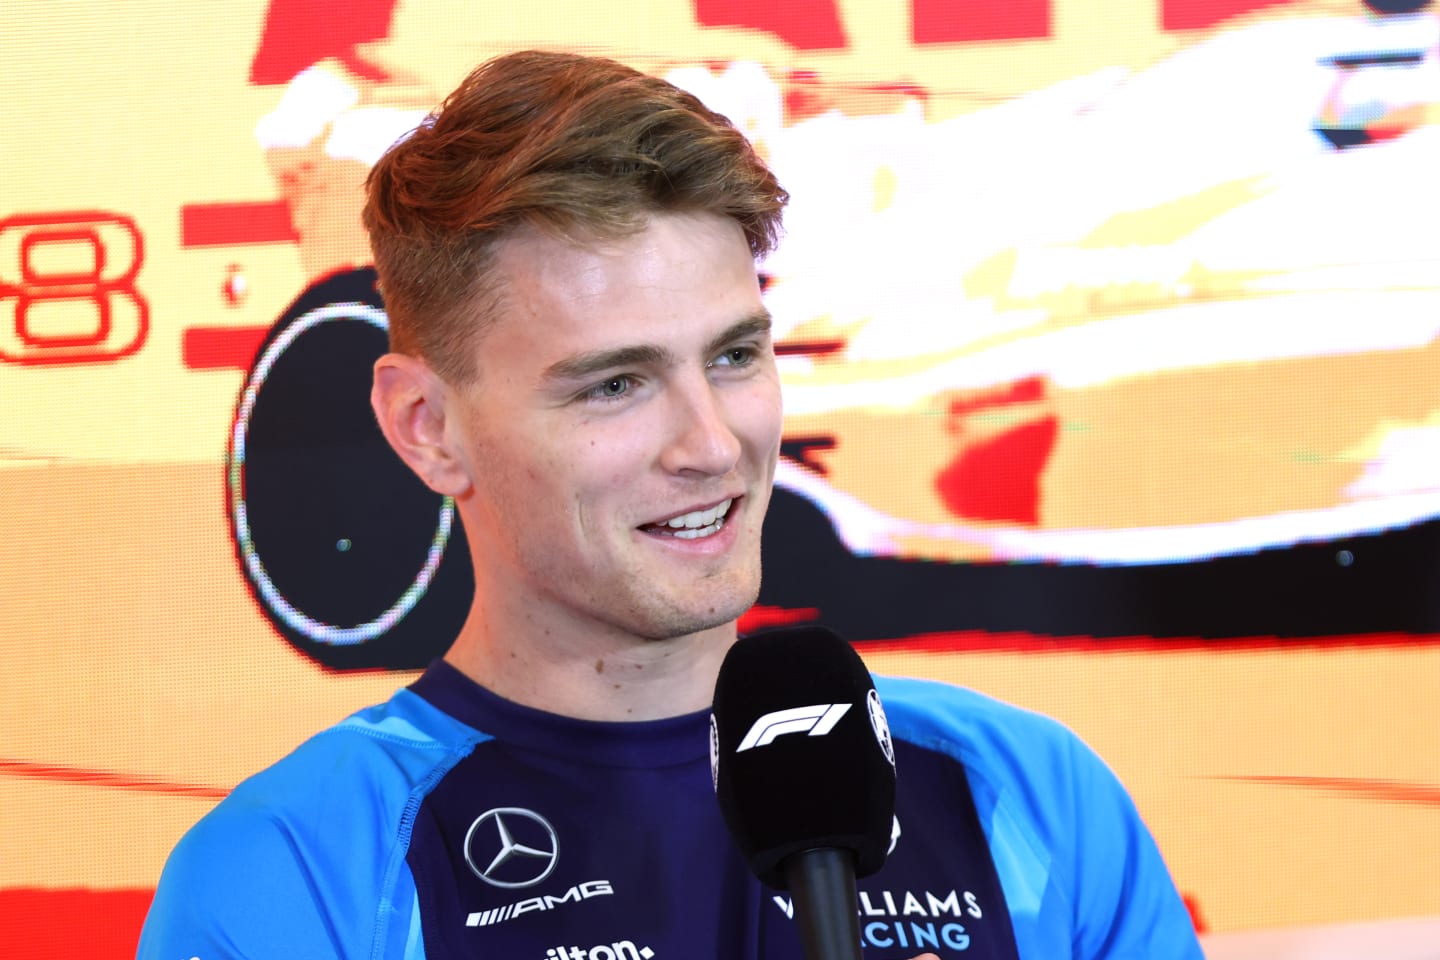 BARCELONA, SPAIN - JUNE 01: Logan Sargeant of United States and Williams attends the Drivers Press Conference during previews ahead of the F1 Grand Prix of Spain at Circuit de Barcelona-Catalunya on June 01, 2023 in Barcelona, Spain. (Photo by Dan Istitene/Getty Images)